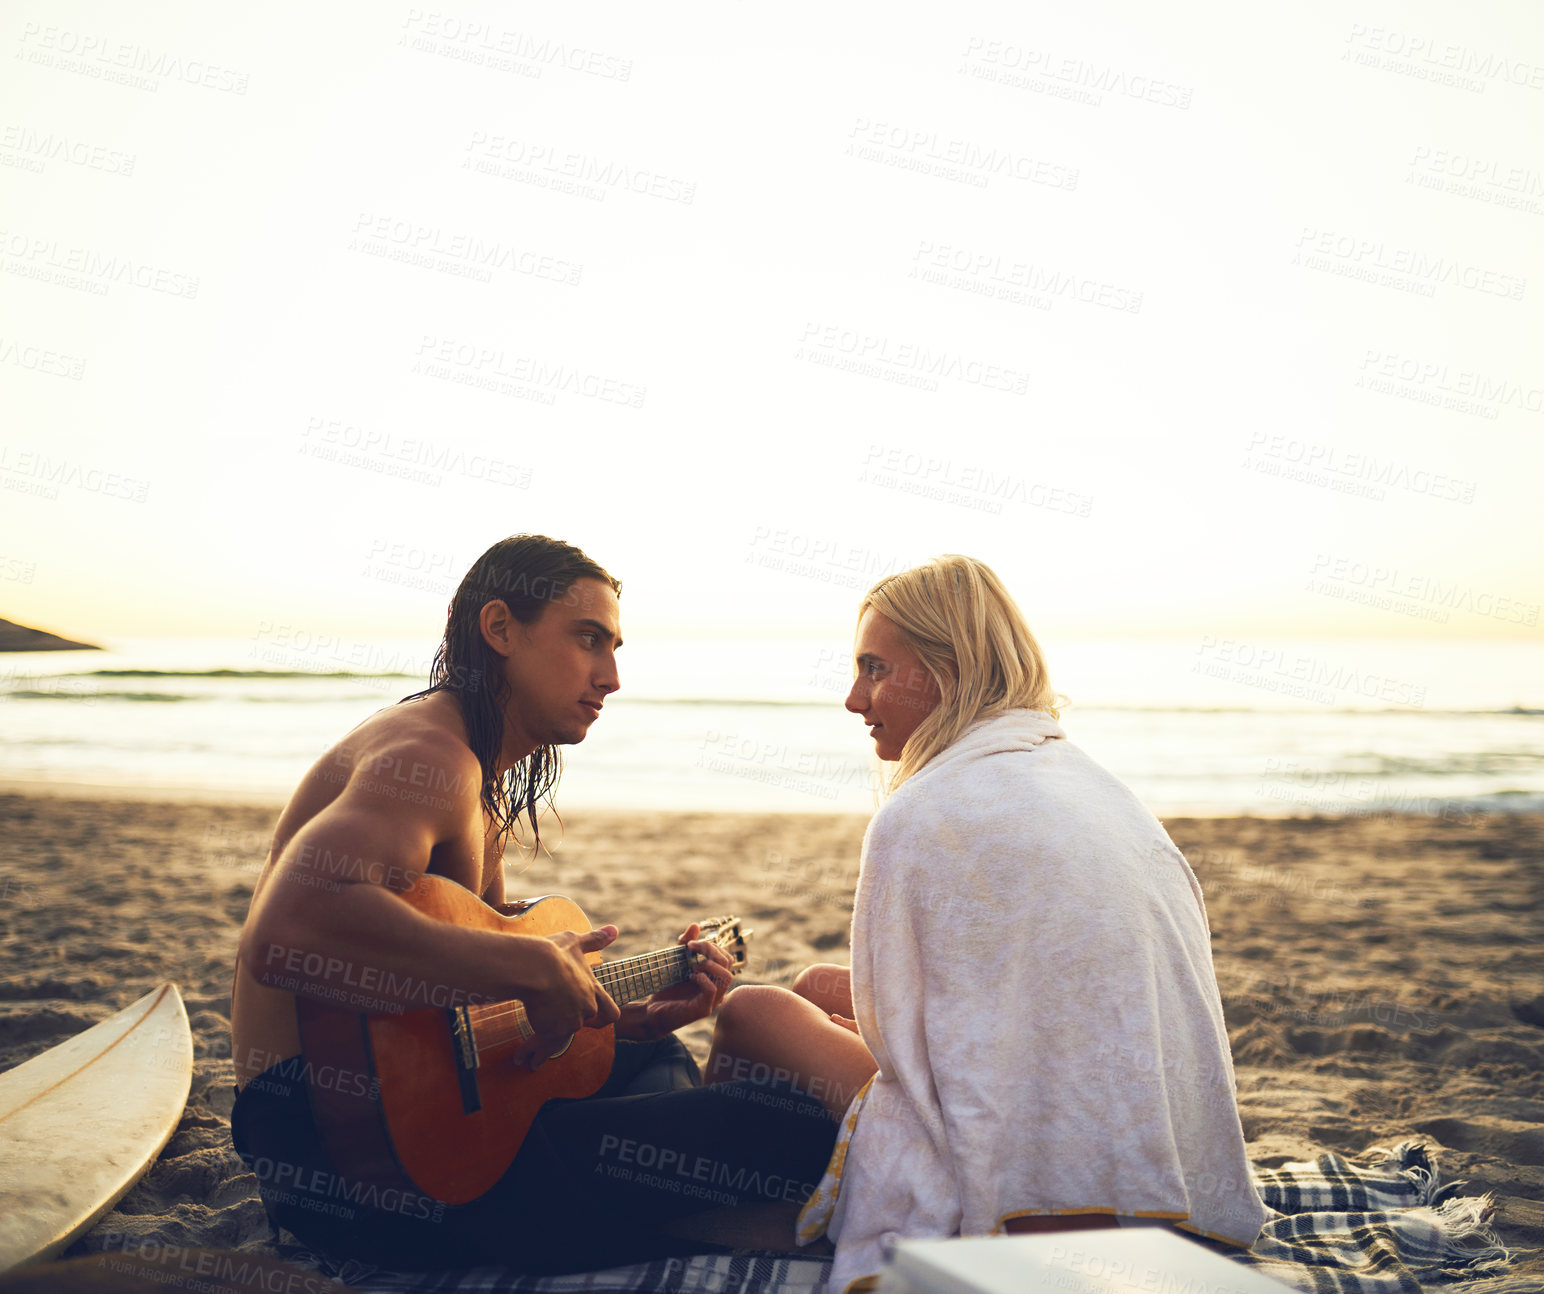 Buy stock photo Rearview shot of a young affectionate couple serenading each other during a date on the beach at sunset